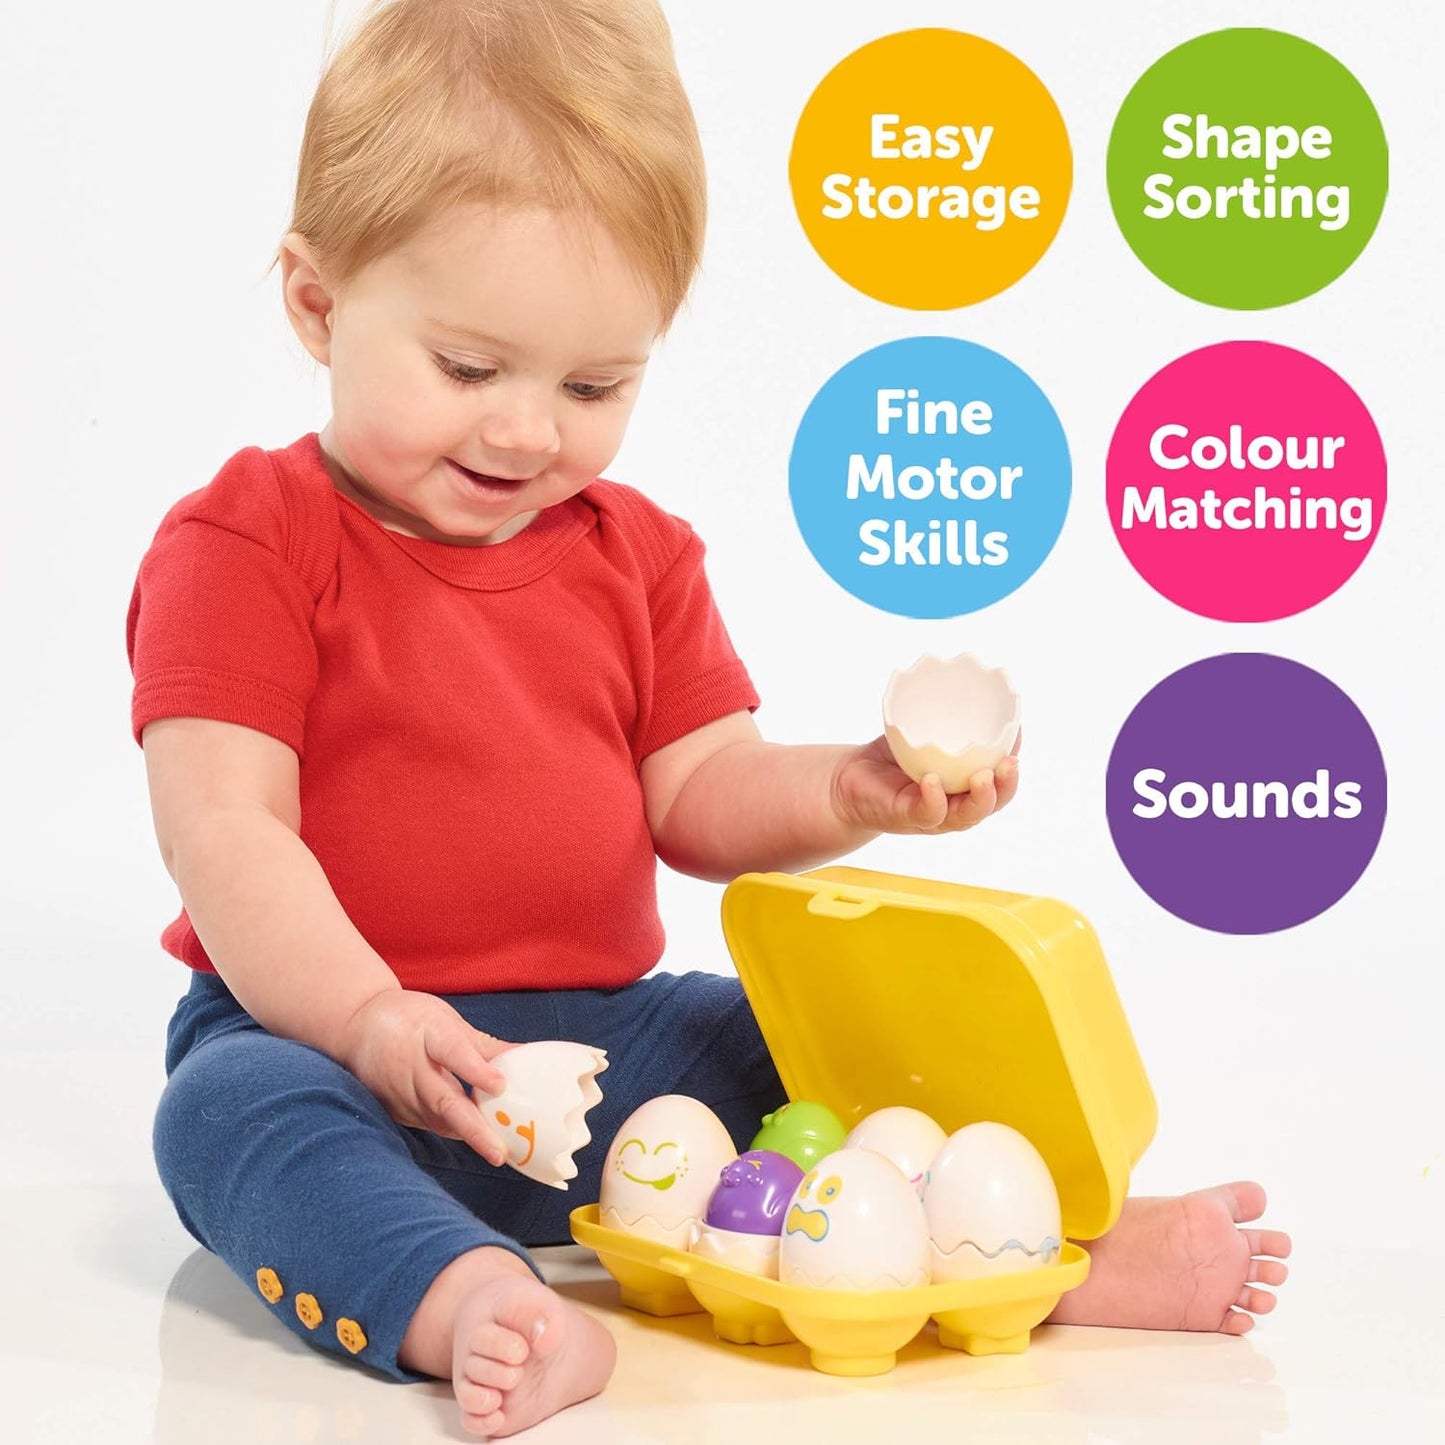 Toomies Hide & Squeak Easter Eggs Toddler Toys - Matching and Sorting Games - Musical Toddler Sensory Toys - Toddler Easter Basket Stuffers - Frustration Free Packaging - Ages 12 Months and Up